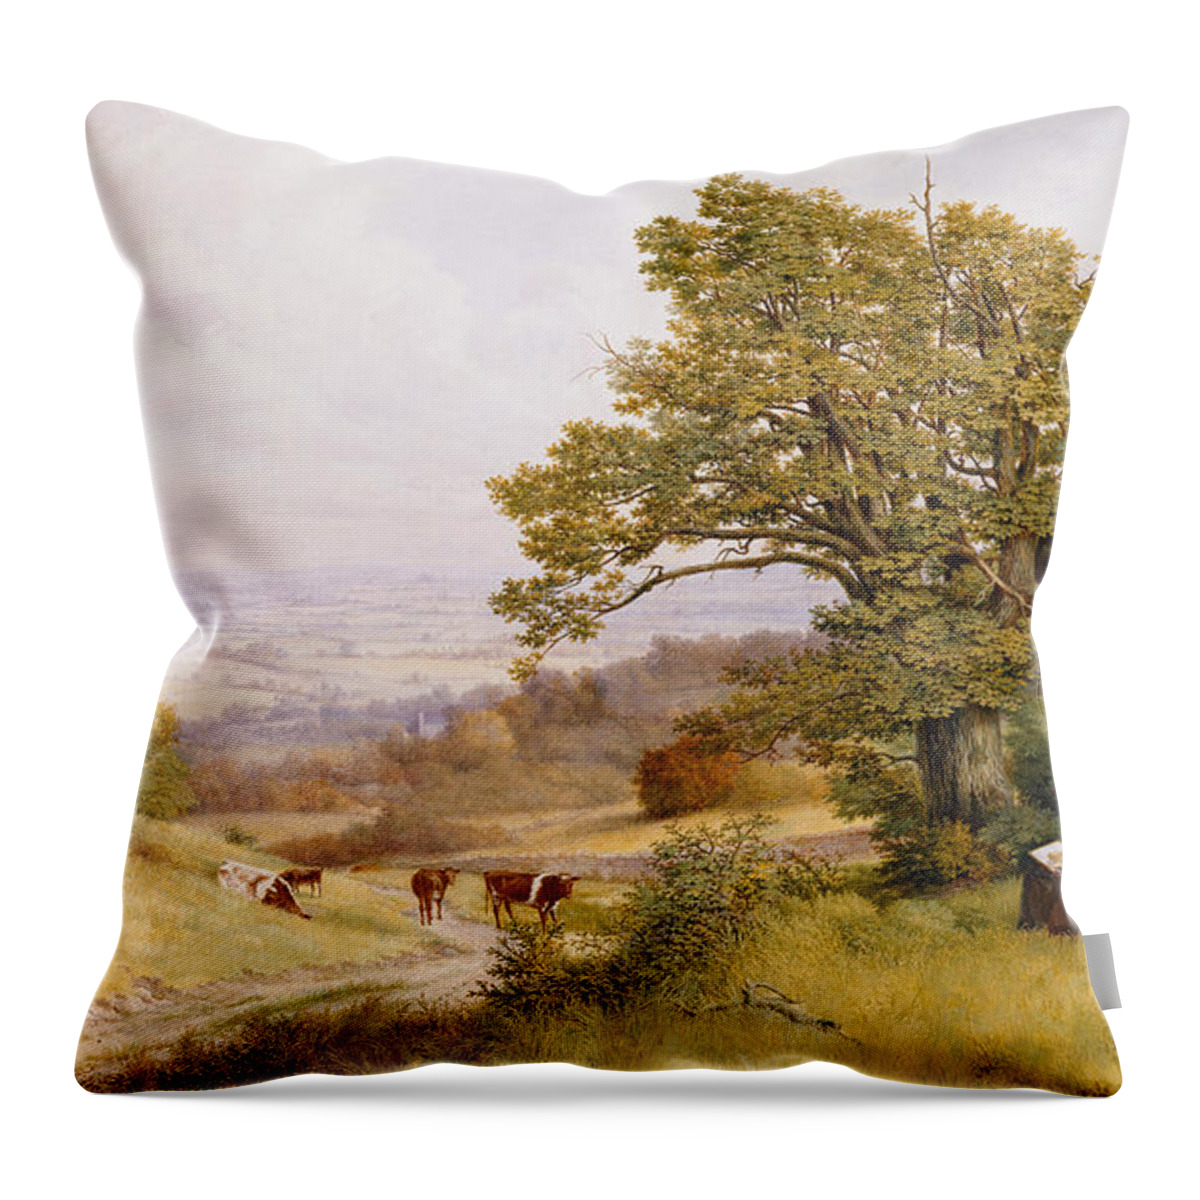 The Throw Pillow featuring the painting The Young Artist by Henry Key